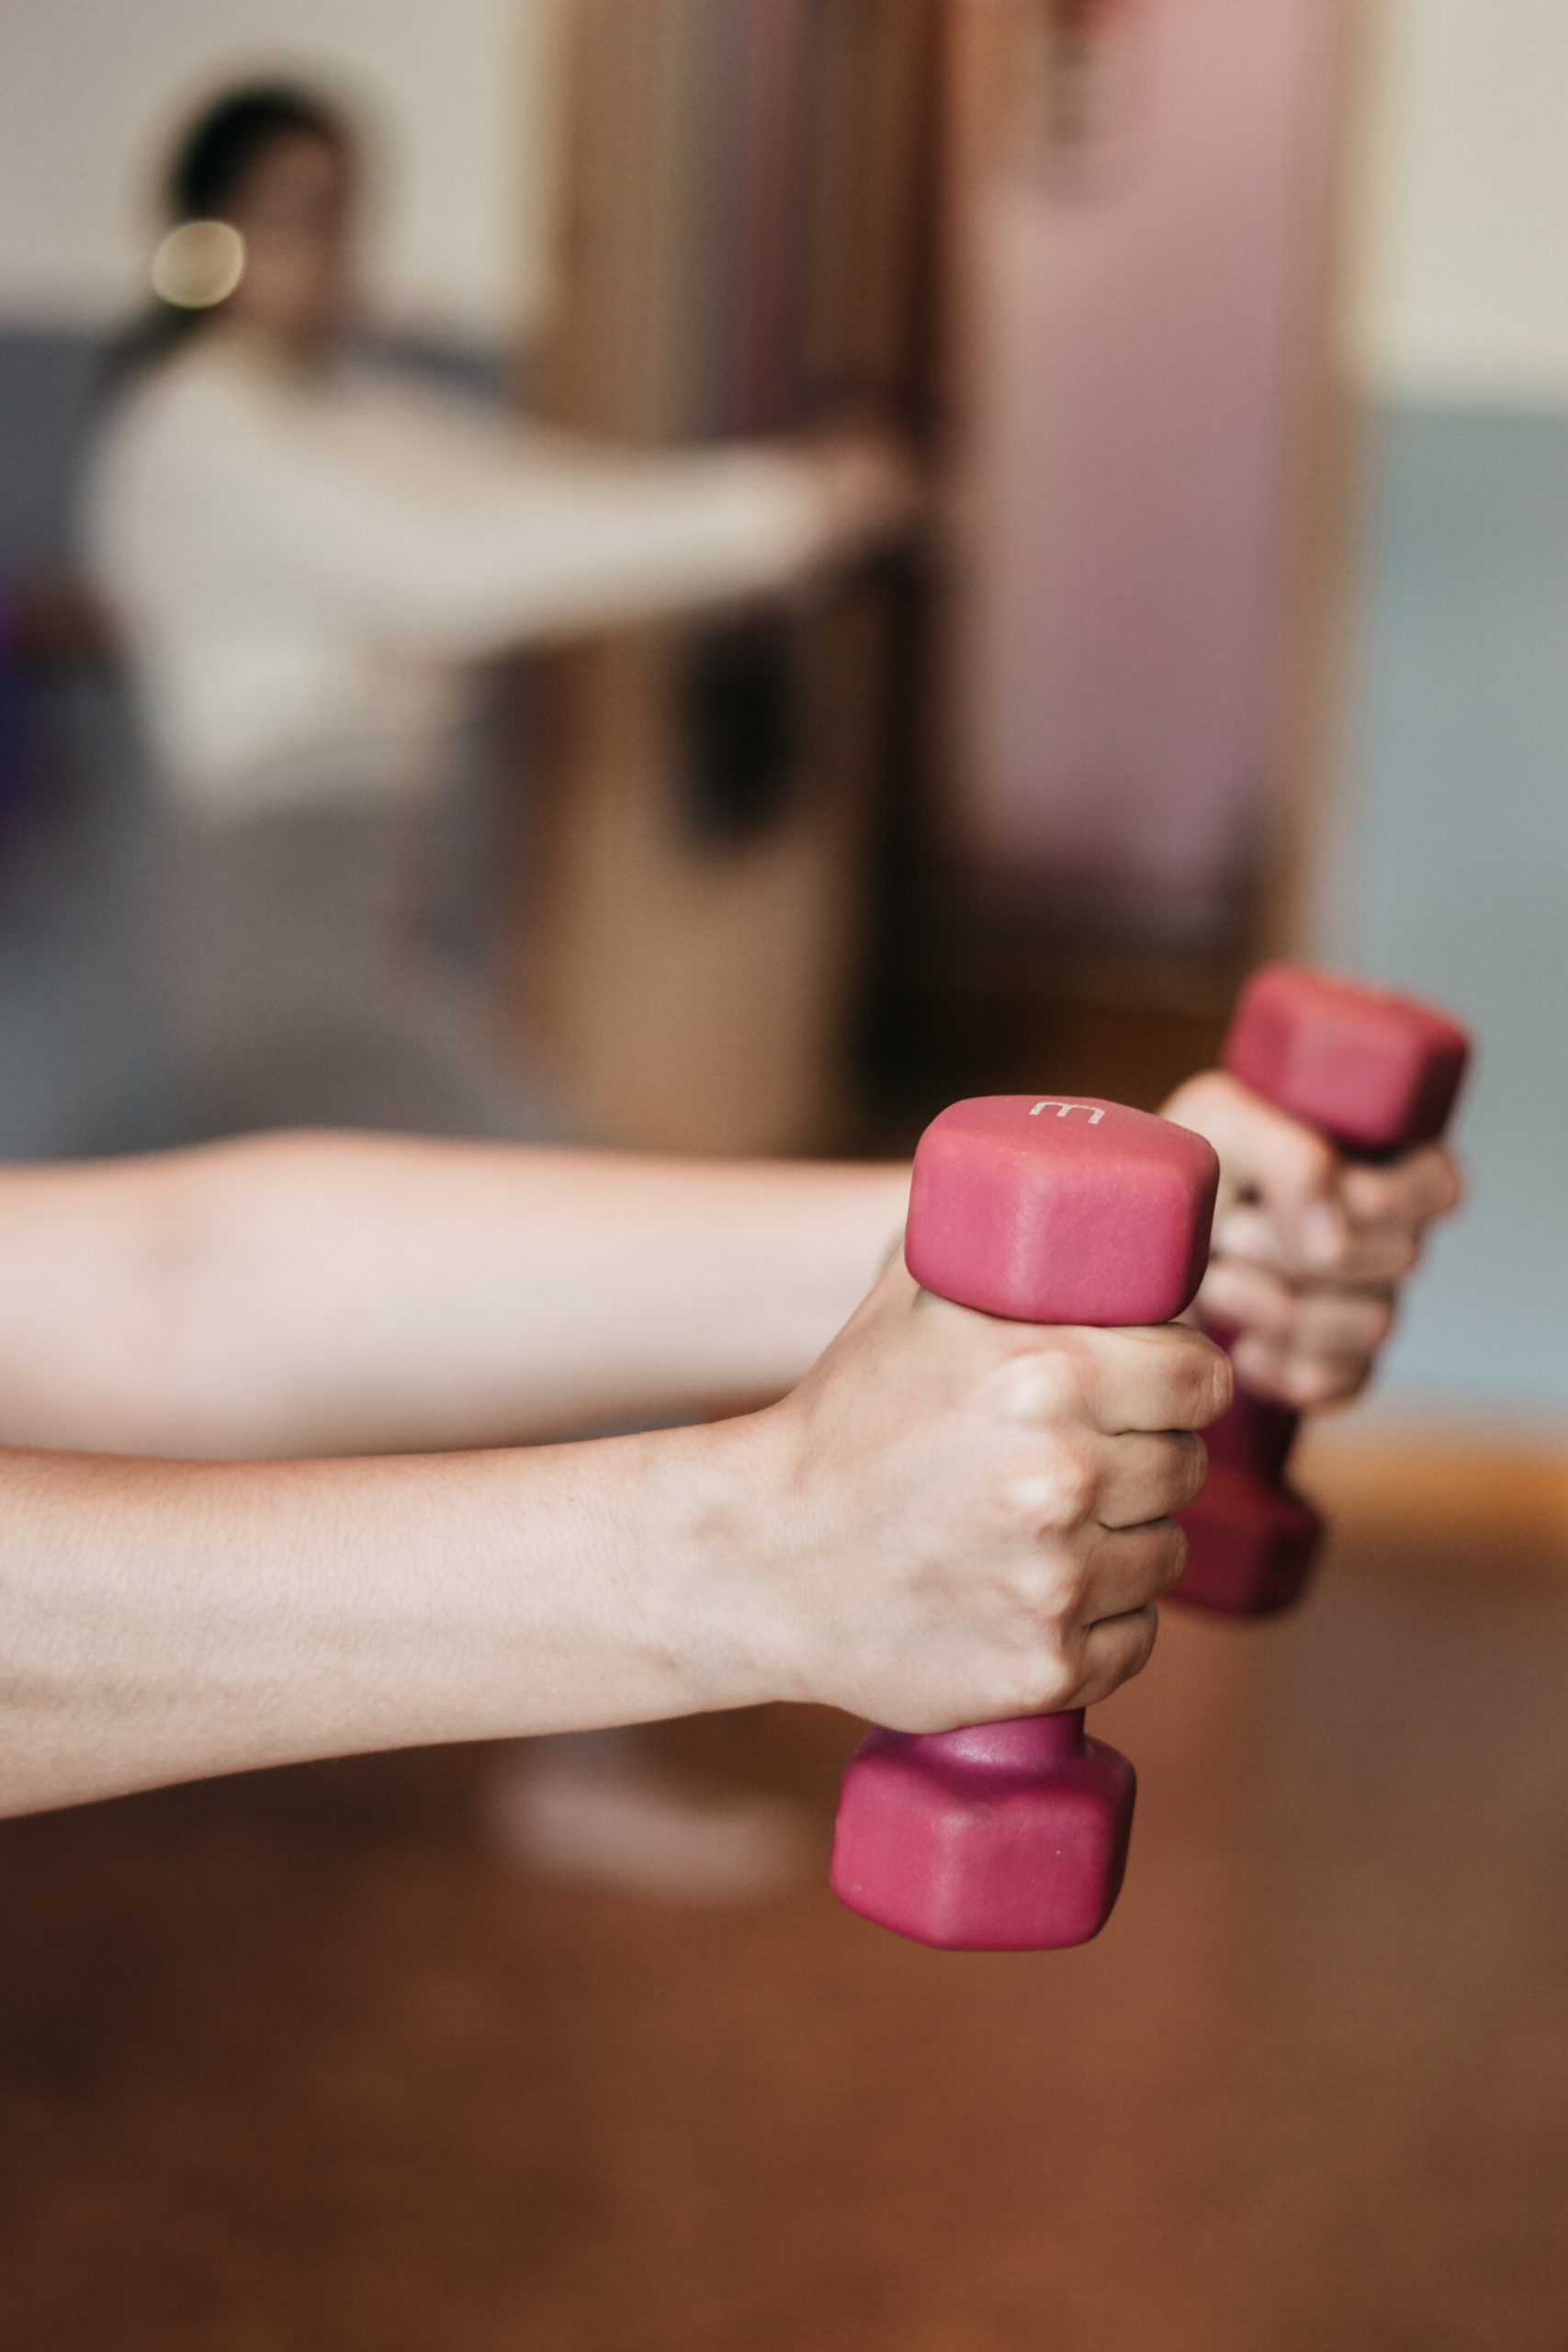 arms hold out two small pink dumbells